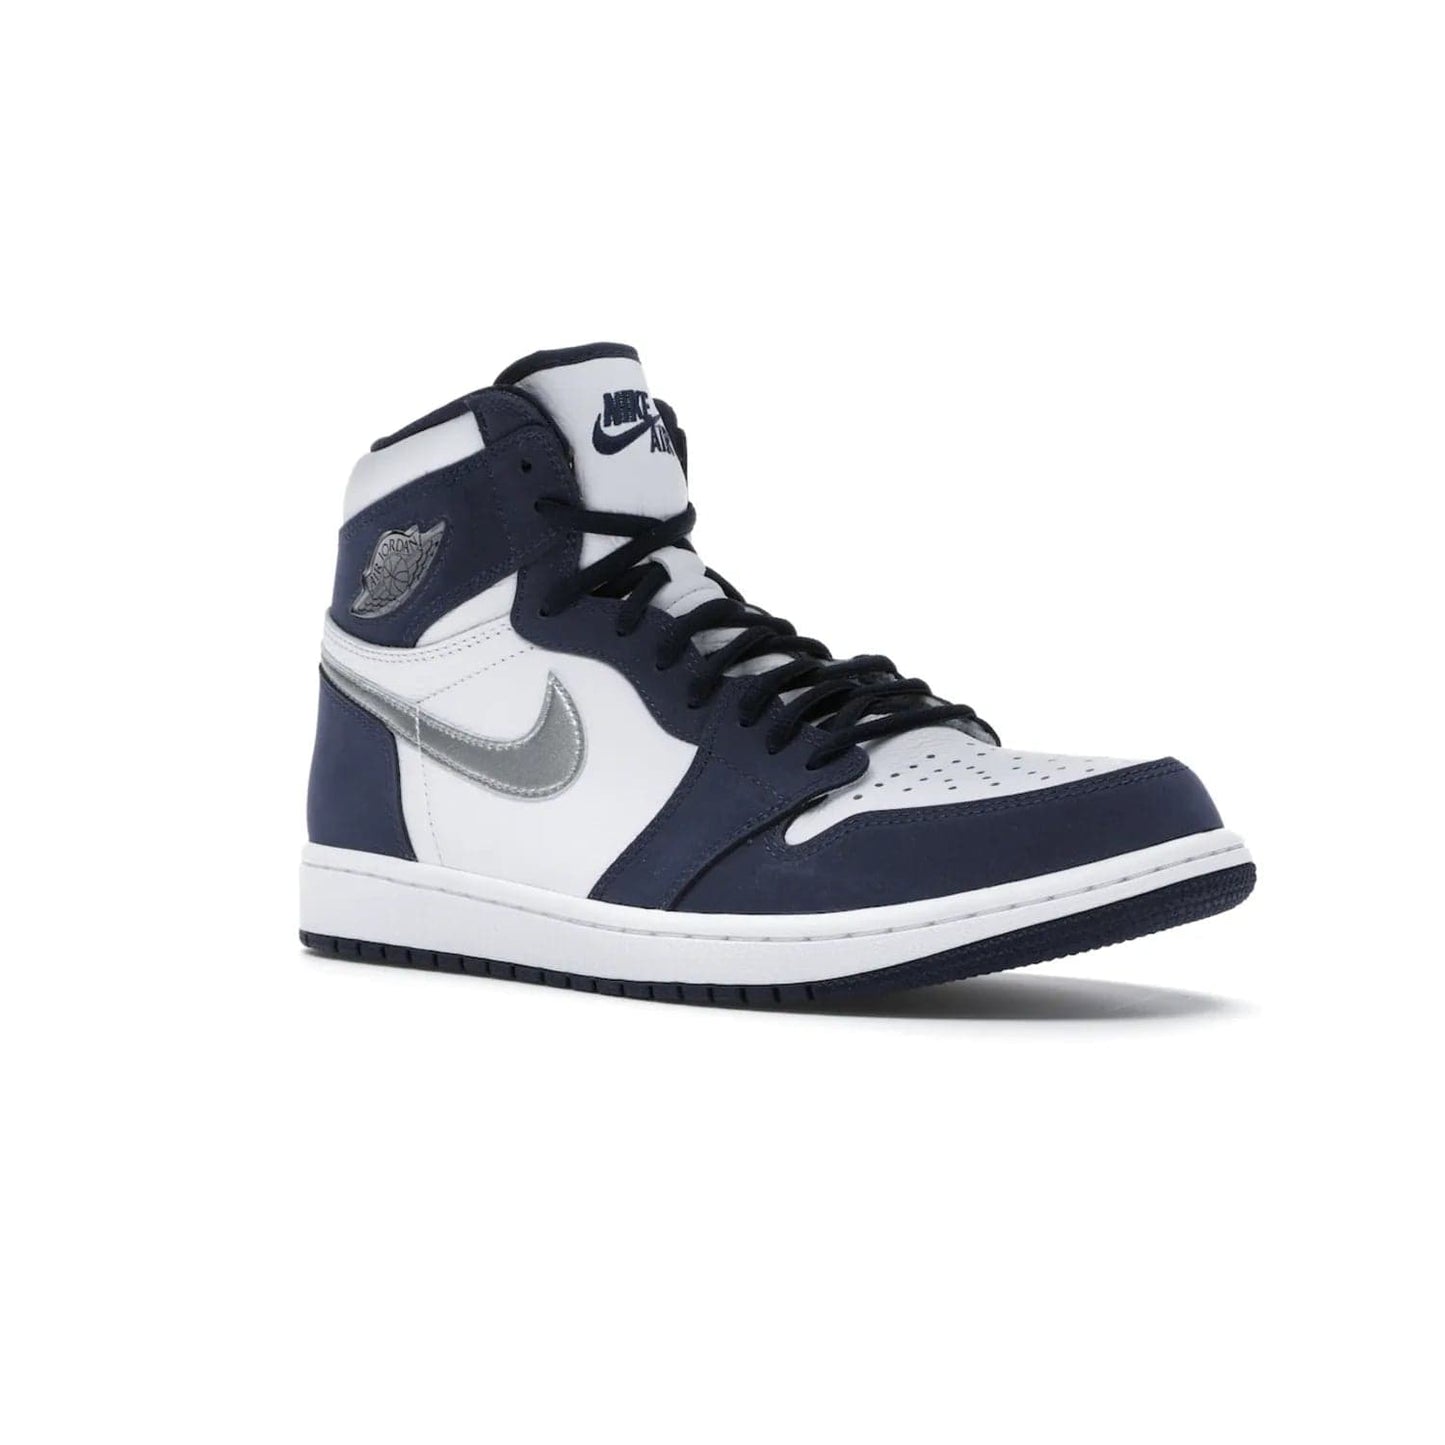 Jordan 1 Retro High COJP Midnight Navy (2020) - Image 5 - Only at www.BallersClubKickz.com - Air Jordan 1 Retro High COJP Midnight Navy - Iconic silhouette updated with a modern touch. Be ahead of the game with this timeless style. Get it now.